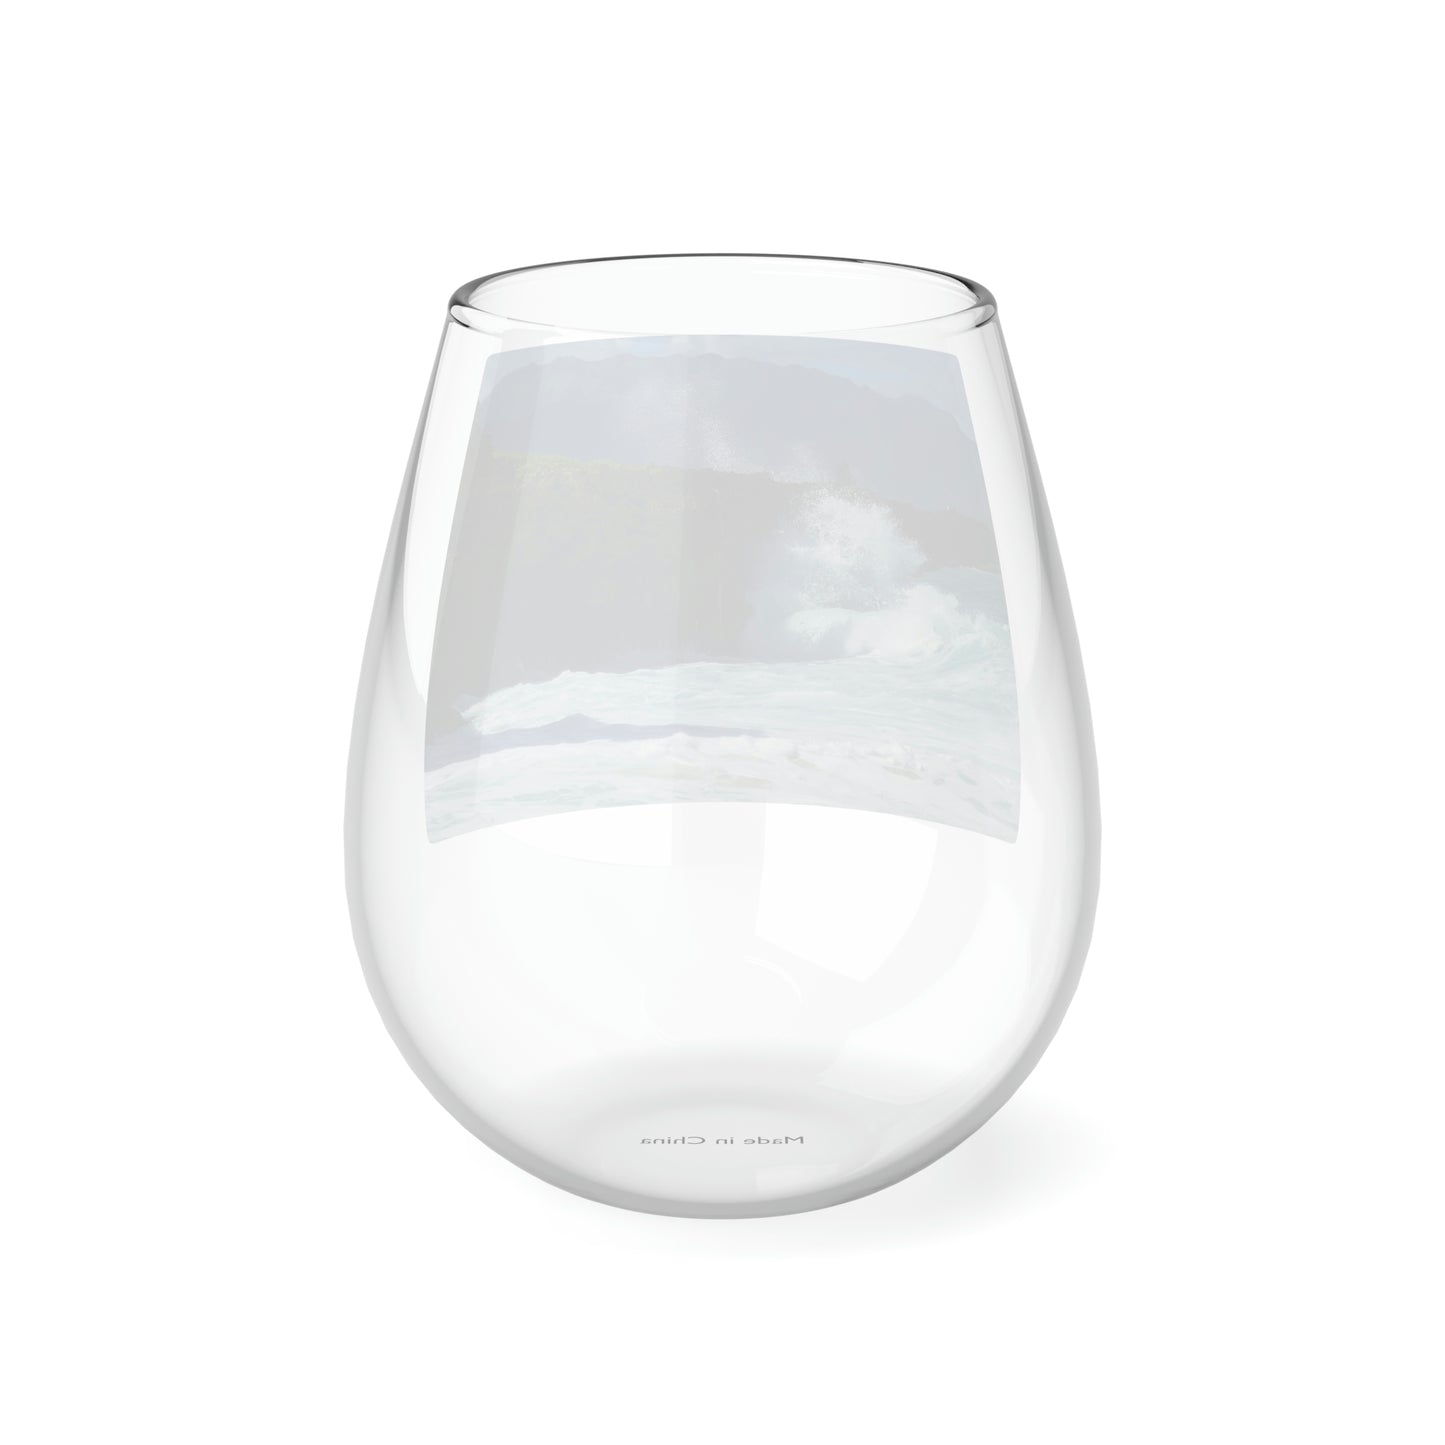 Rockin Surfer's Rope - Stemless Wine Glass, 11.75 oz - Fry1Productions